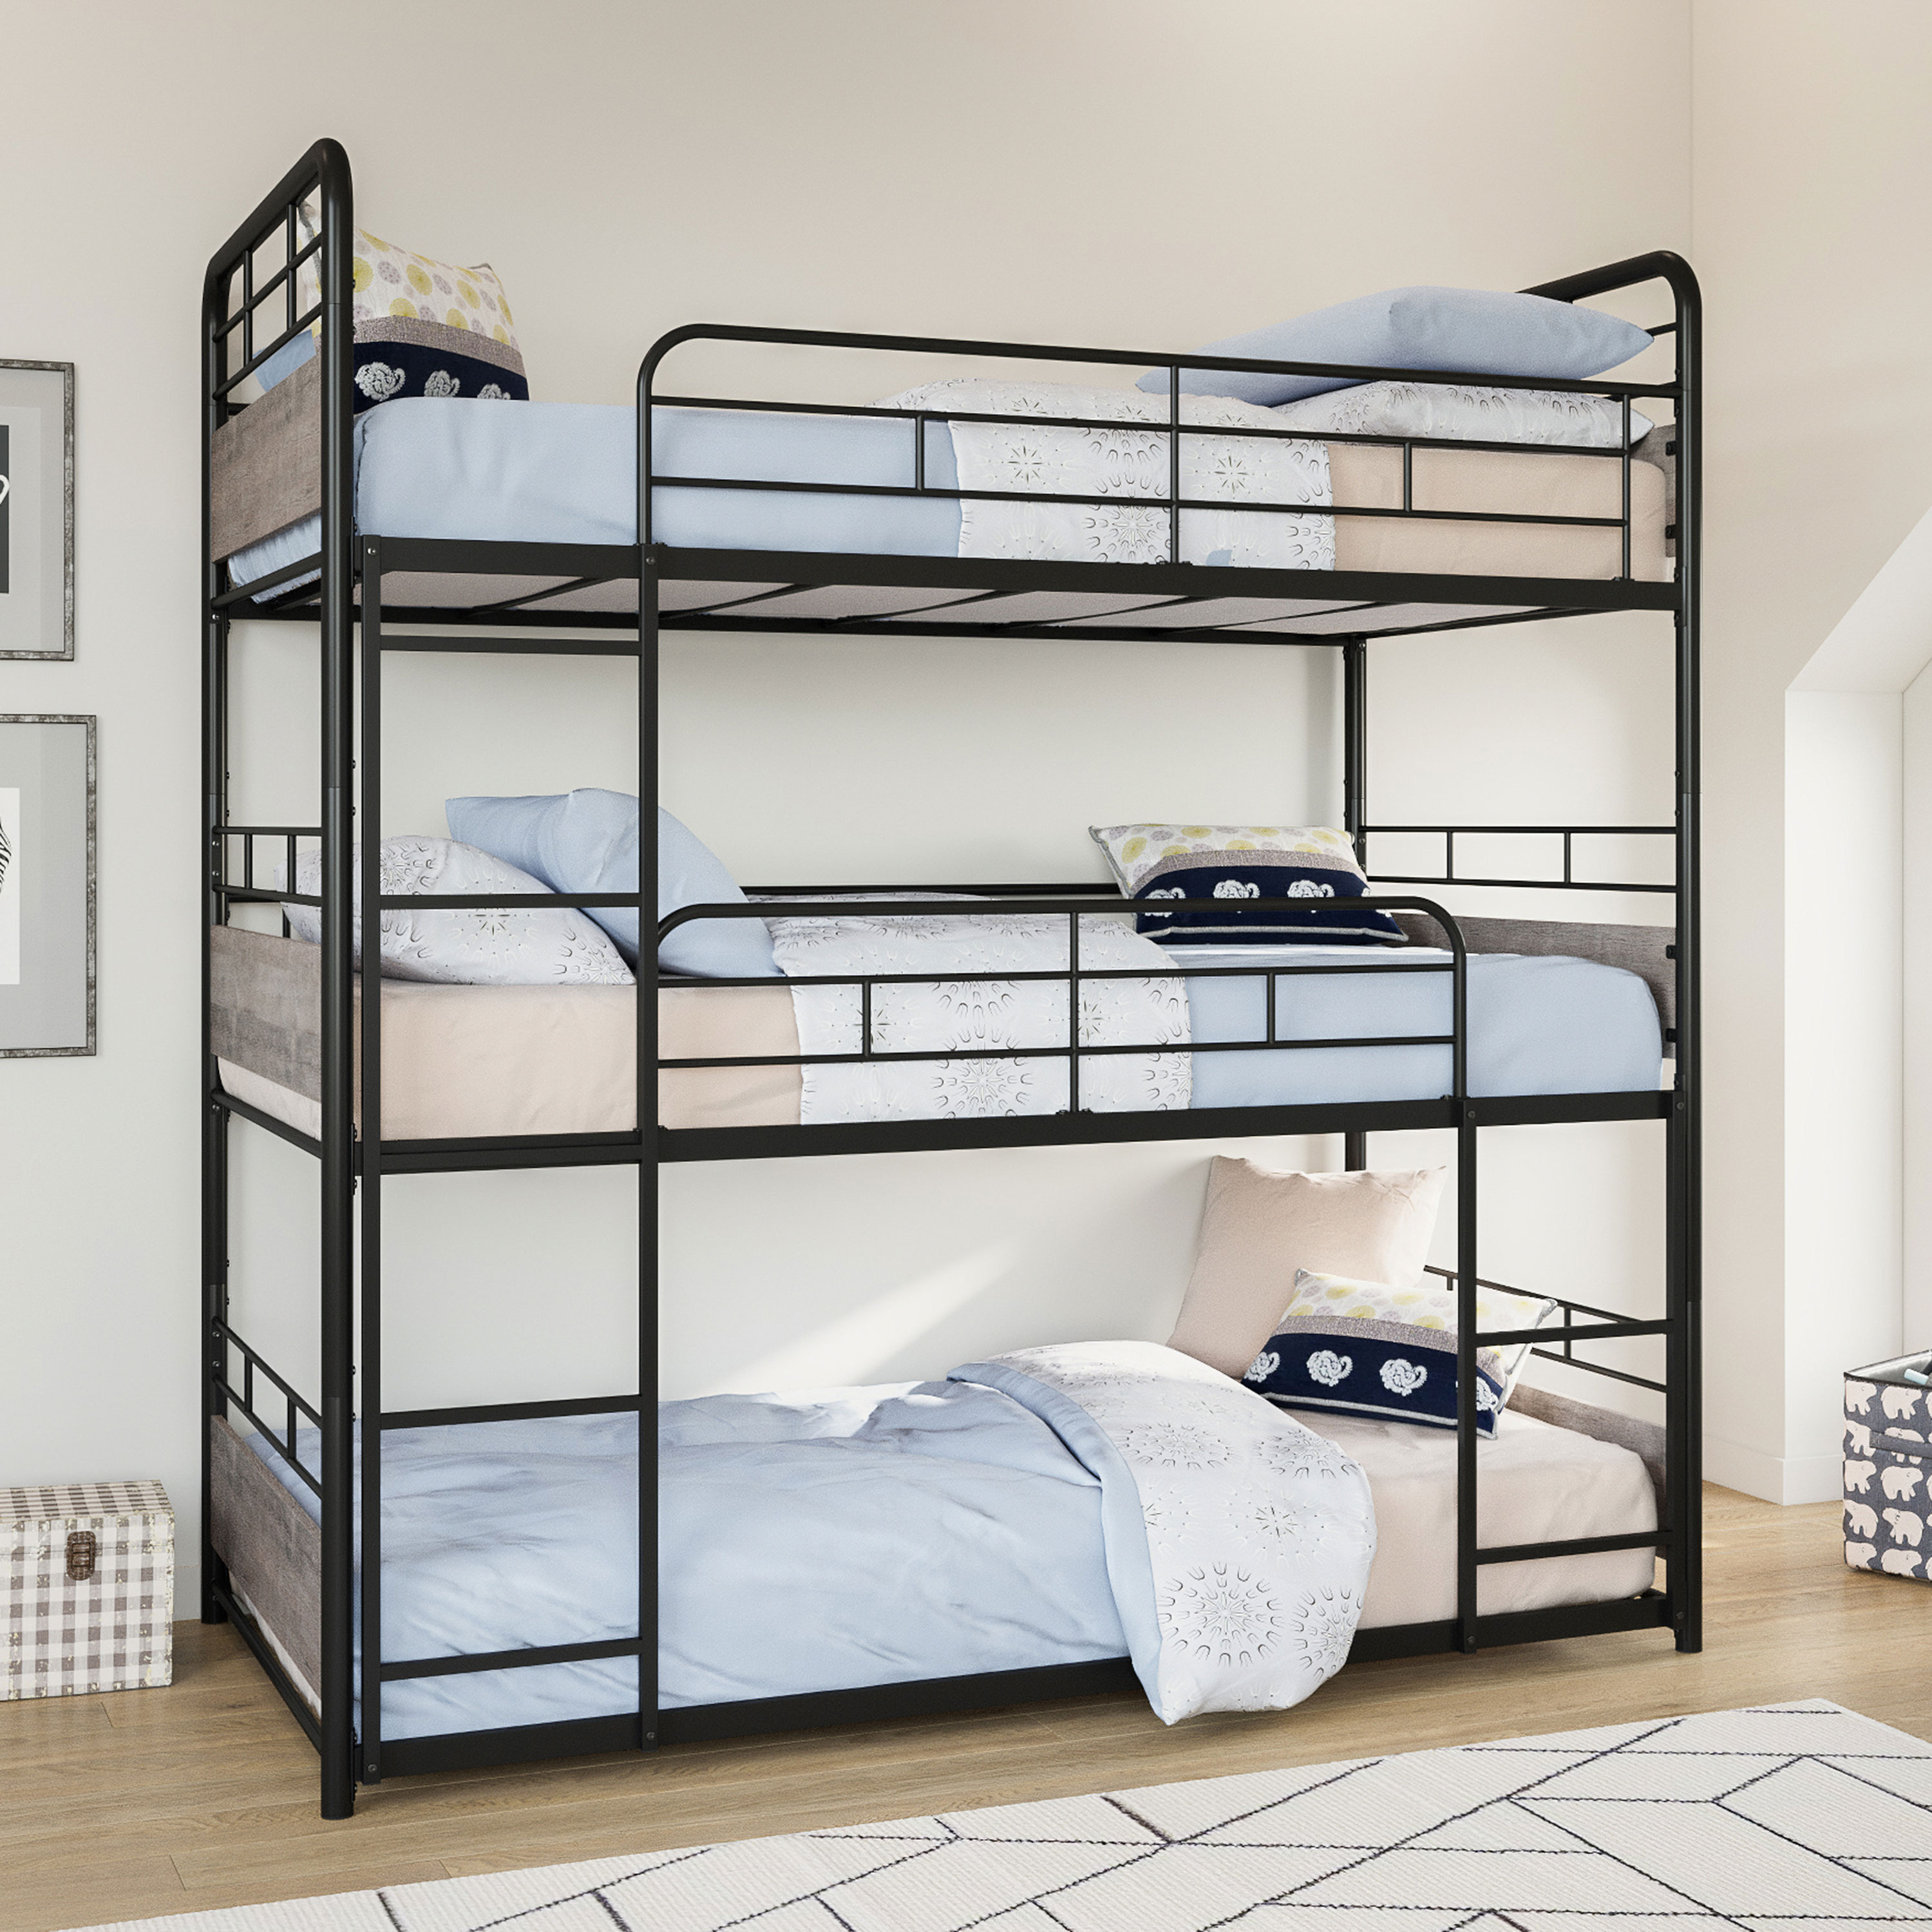 Better Homes & Gardens Anniston Convertible Black Metal Triple Twin Bunk Bed, Gray Wood Accents - image 1 of 26